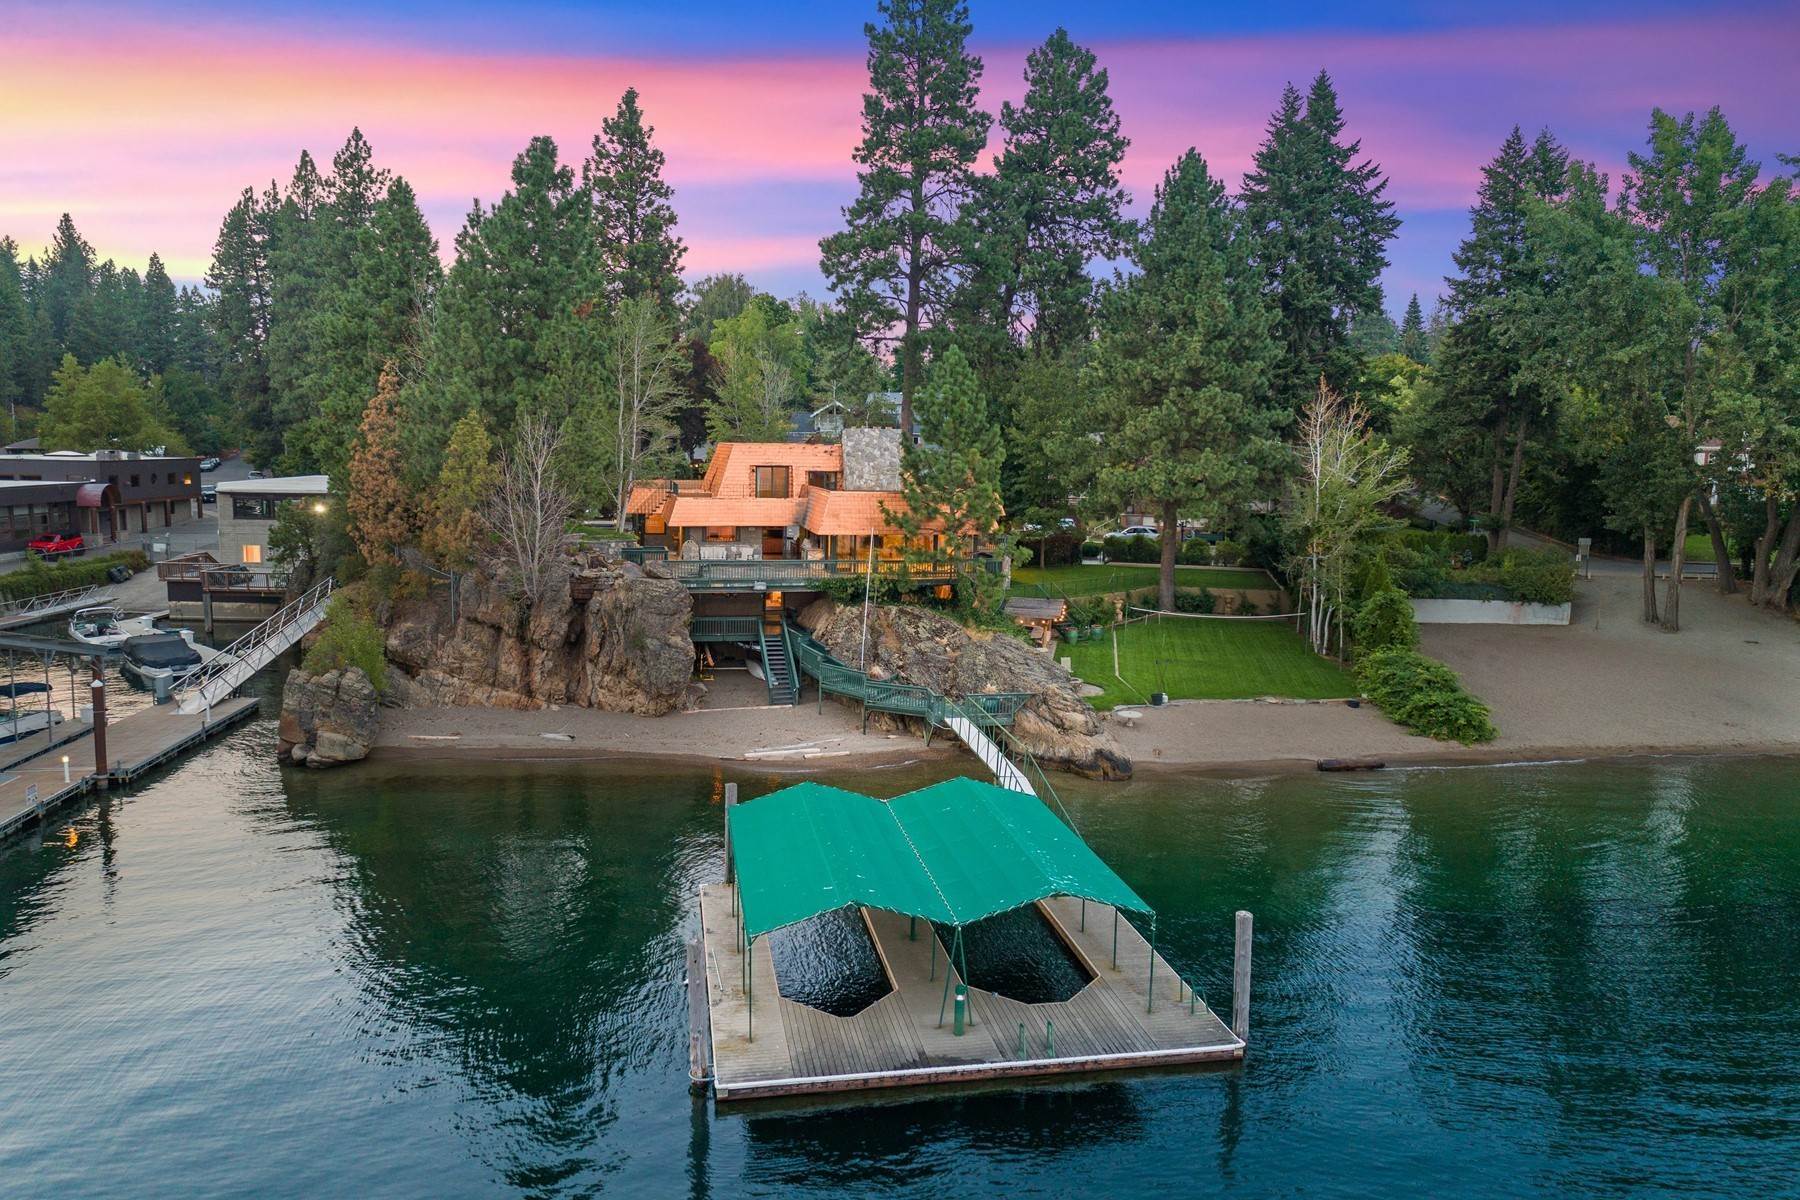 Single Family Homes for Sale at Rare Sanders Beach Waterfront 1102 E Lakeshore Dr Coeur d’Alene, Idaho 83814 United States